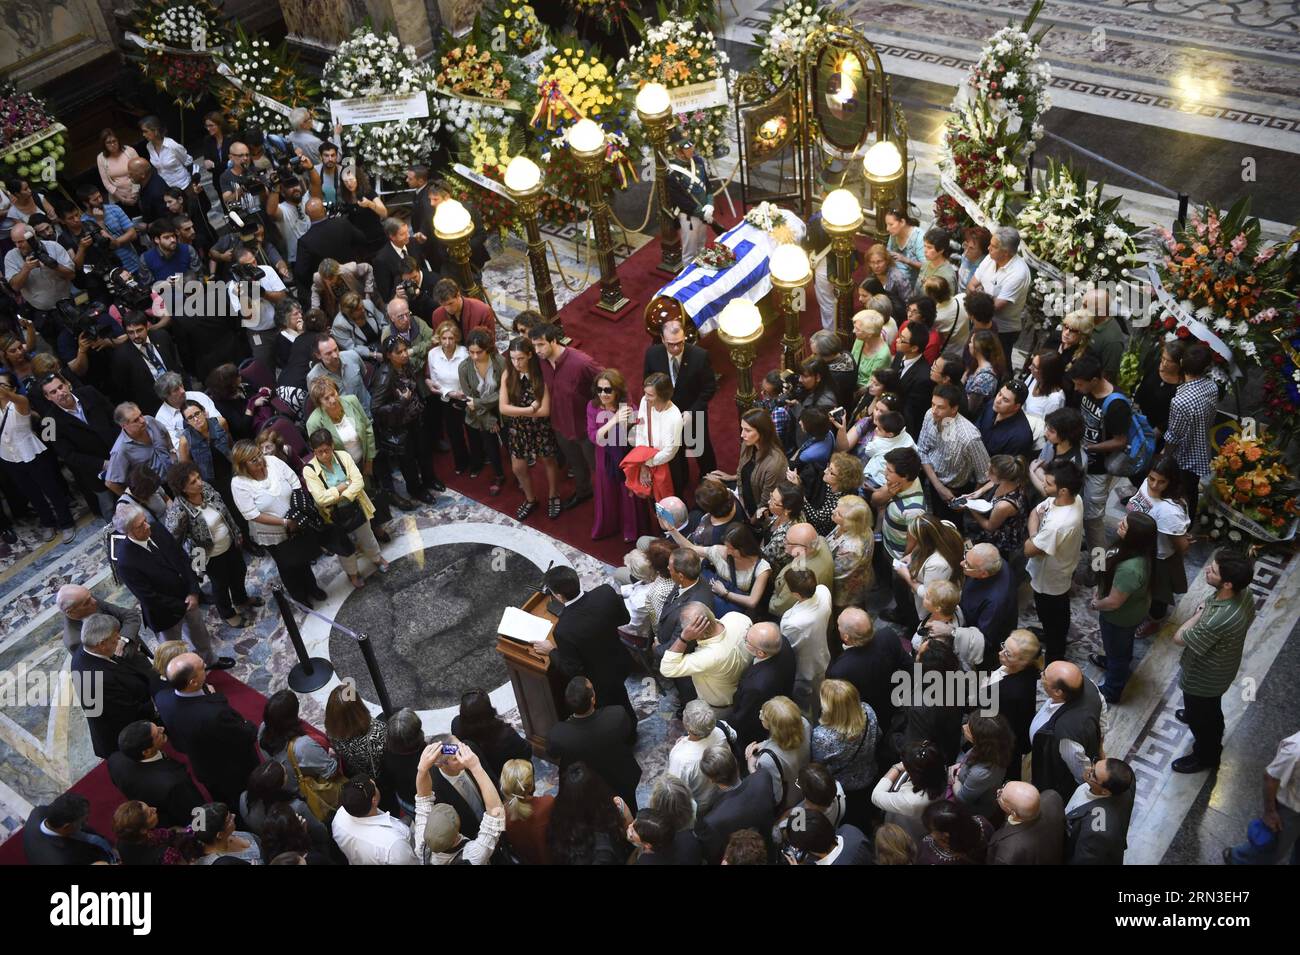 MONTEVIDEO, April 14, 2015 -- People gather around the coffin of Uruguayan writer Eduardo Galeano, during the tribute organized by the government of Uruguay, in the Hall of Lost Steps of the Legislative Palace, in Montevideo, capital of Uruguay, on April 14, 2015. According to local press, Eduardo Galeano, author of The Open Veins of Latin America (1971), died on Monday in Montevideo at the age of 74 years as a result of lung cancer. Galeano s body will be cremated on Wednesday. Nicolas Celaya) (bxq) URUGUAY-MONTEVIDEO-CULTURE-EDUARDO GALEANO e NICOLASxCELAYA PUBLICATIONxNOTxINxCHN   Montevide Stock Photo